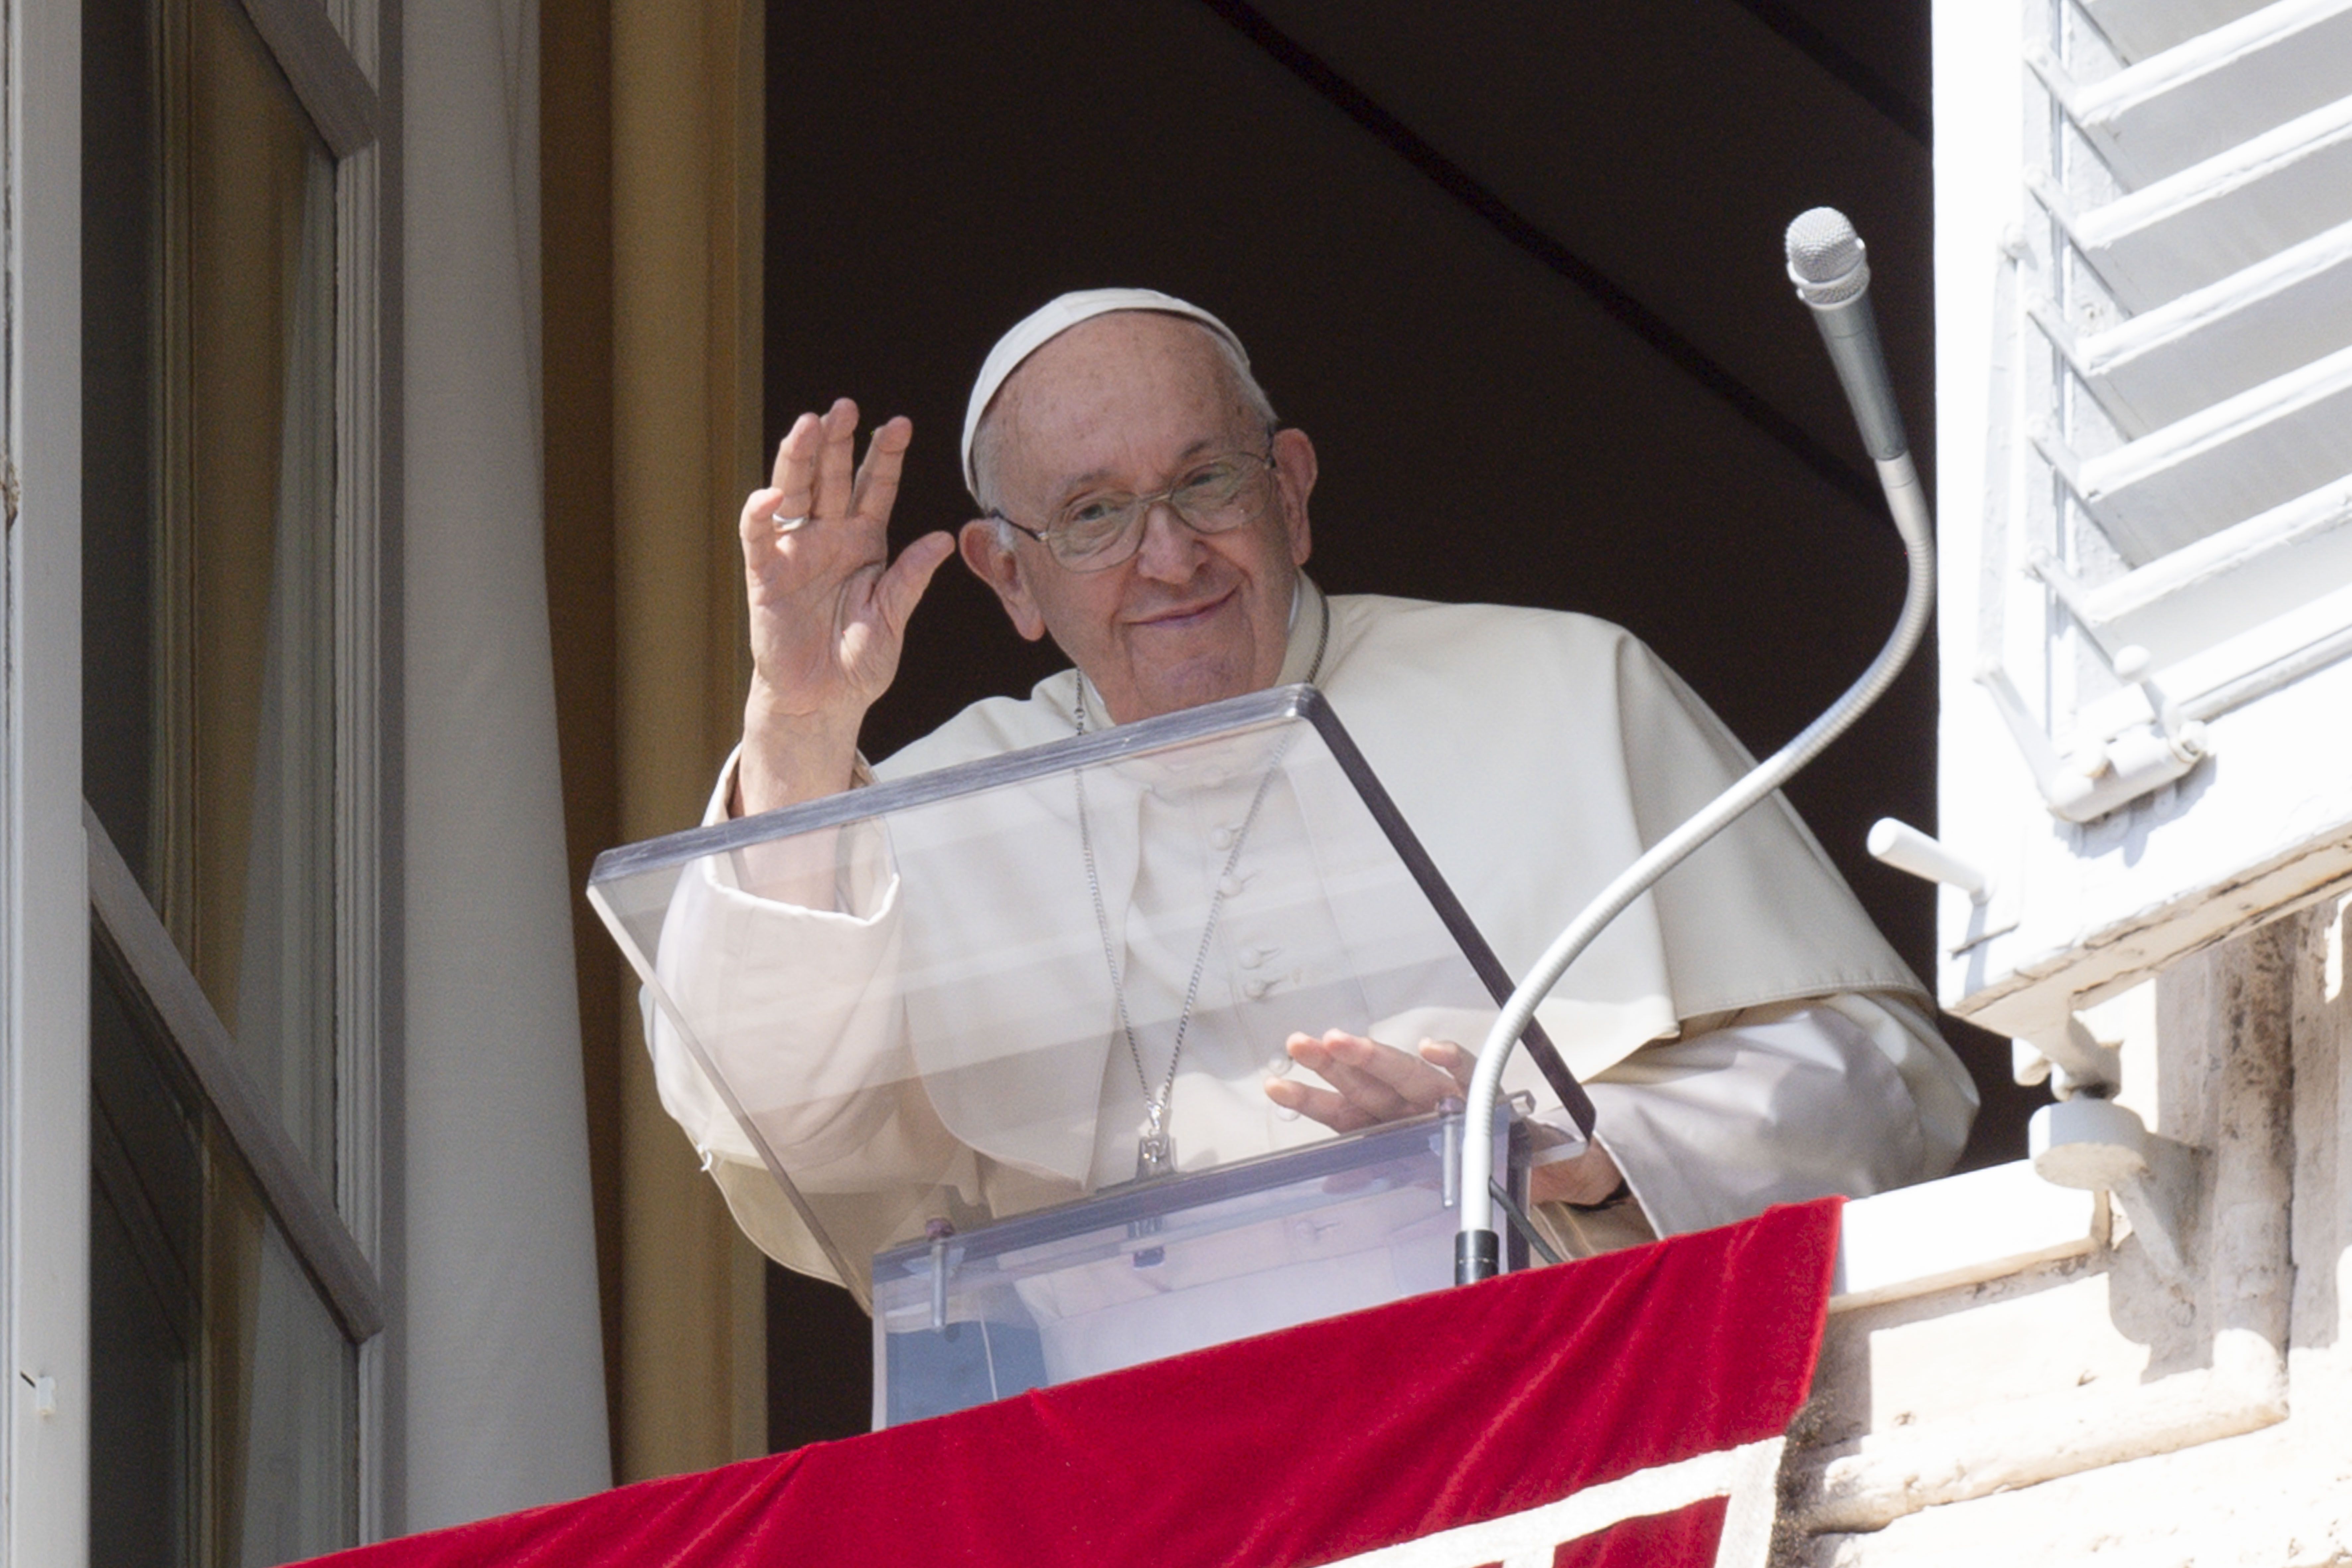 Pope Francis: Do not forget your life and faith are a gift from God